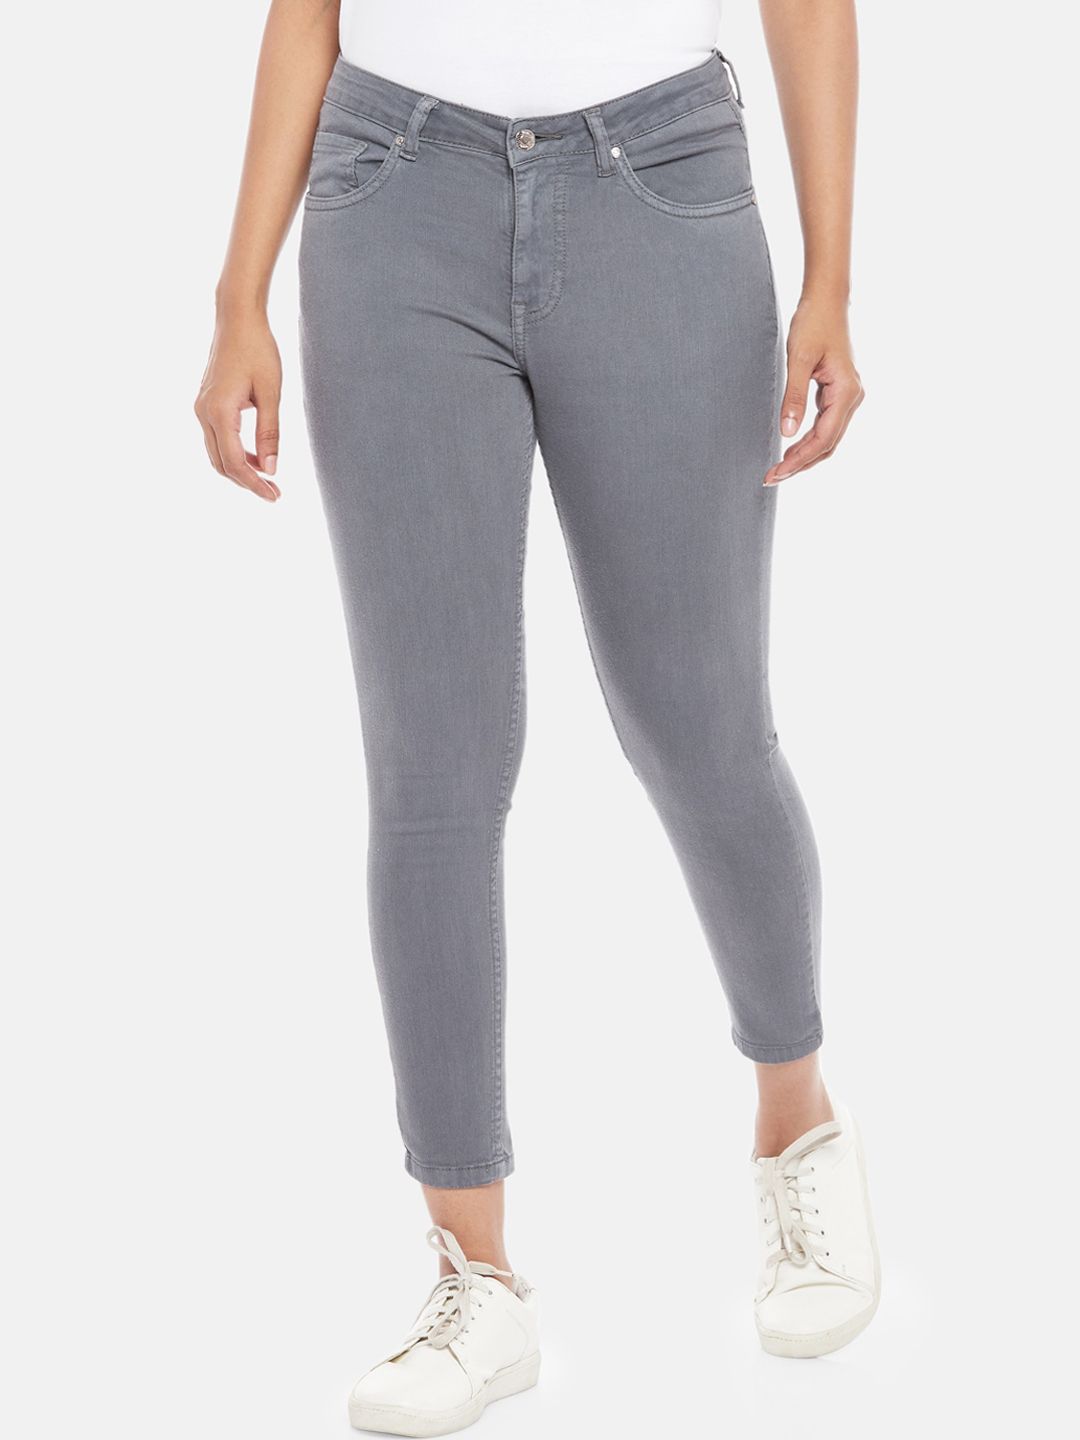 People Women Grey Slim Fit Jeans Price in India